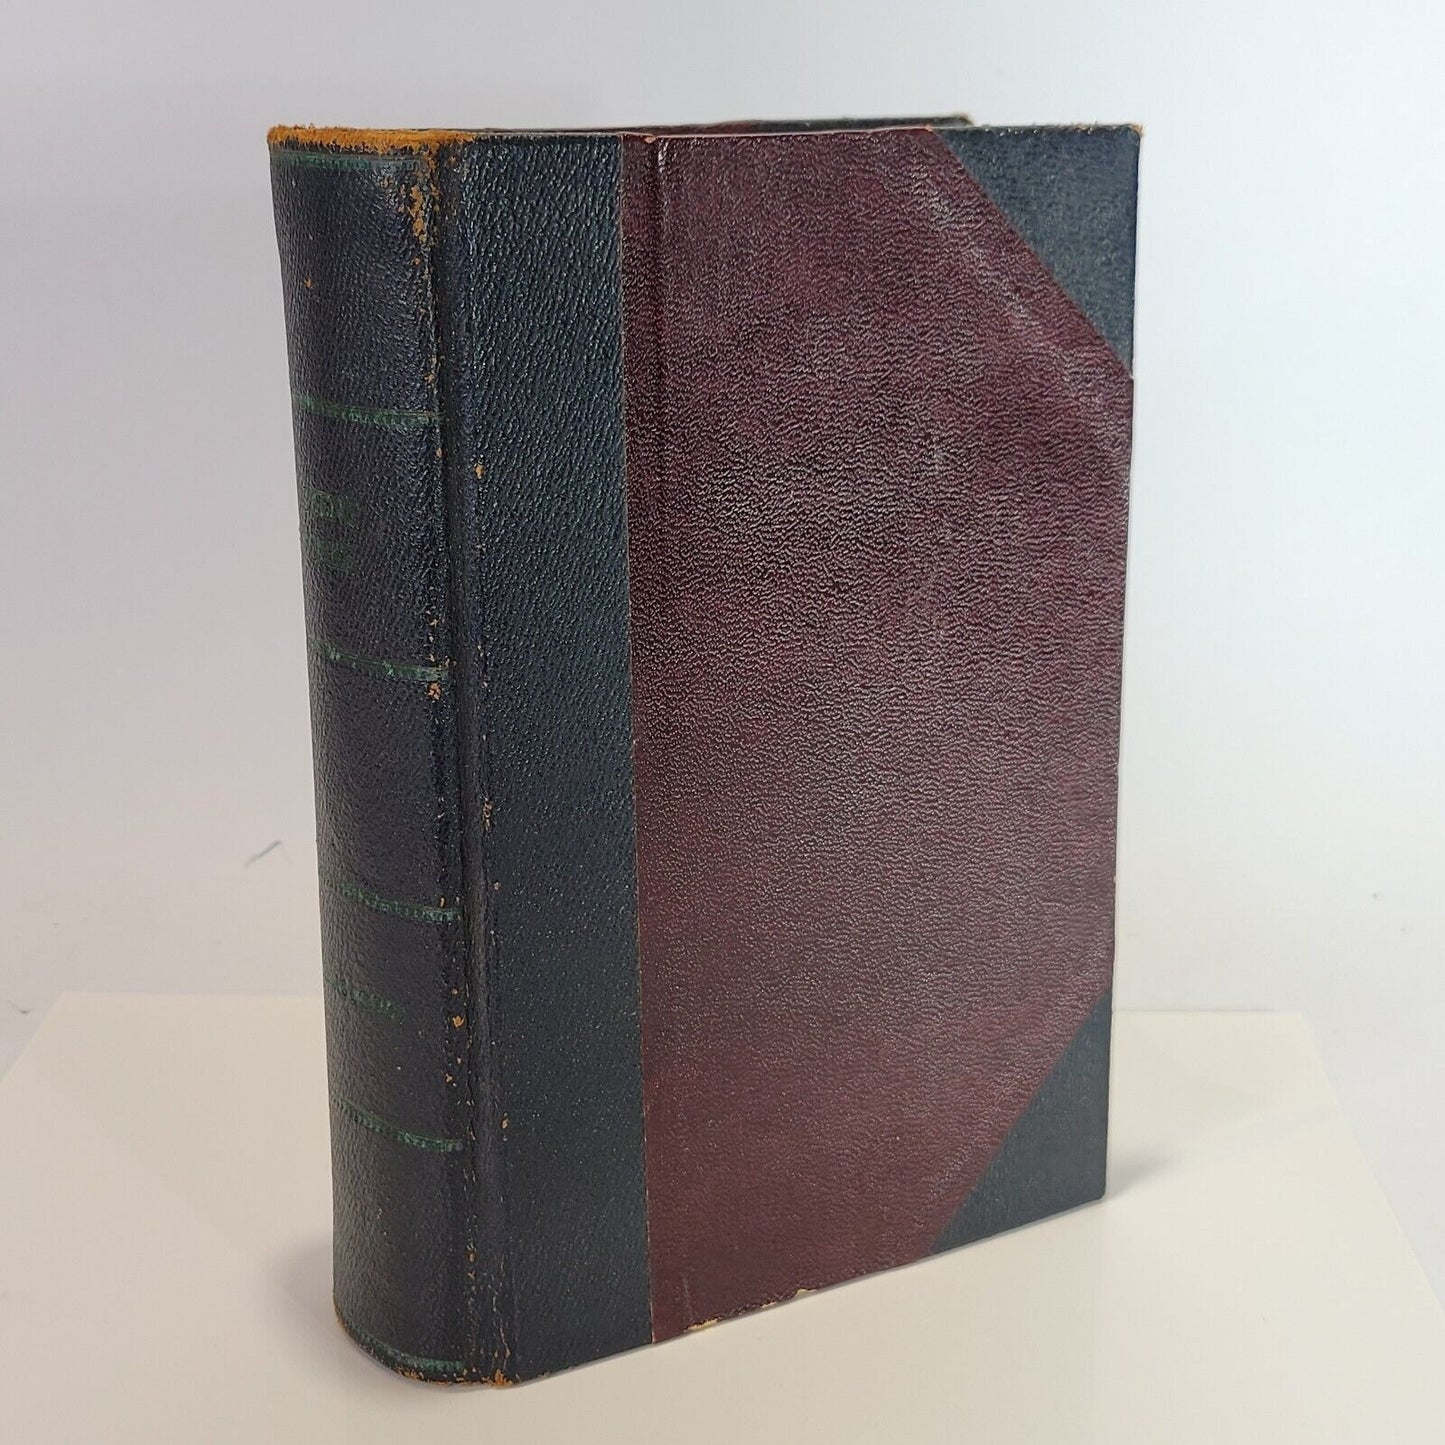 Works Of Charles Dickens: Christmas Books Volume IX Edition de Luxe 1910